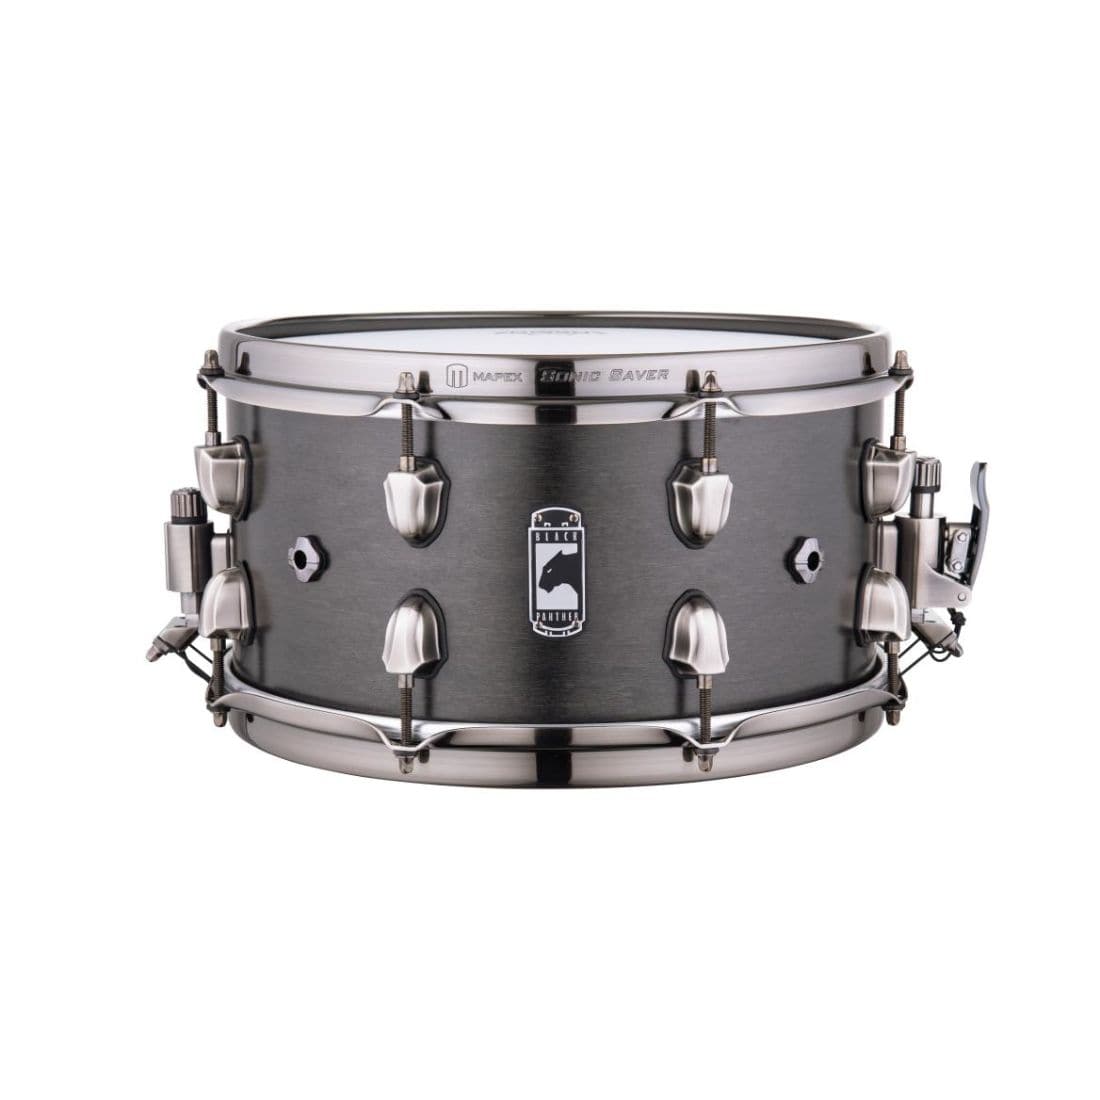 Mapex Black Panther 13x7 Hydro Snare Drum